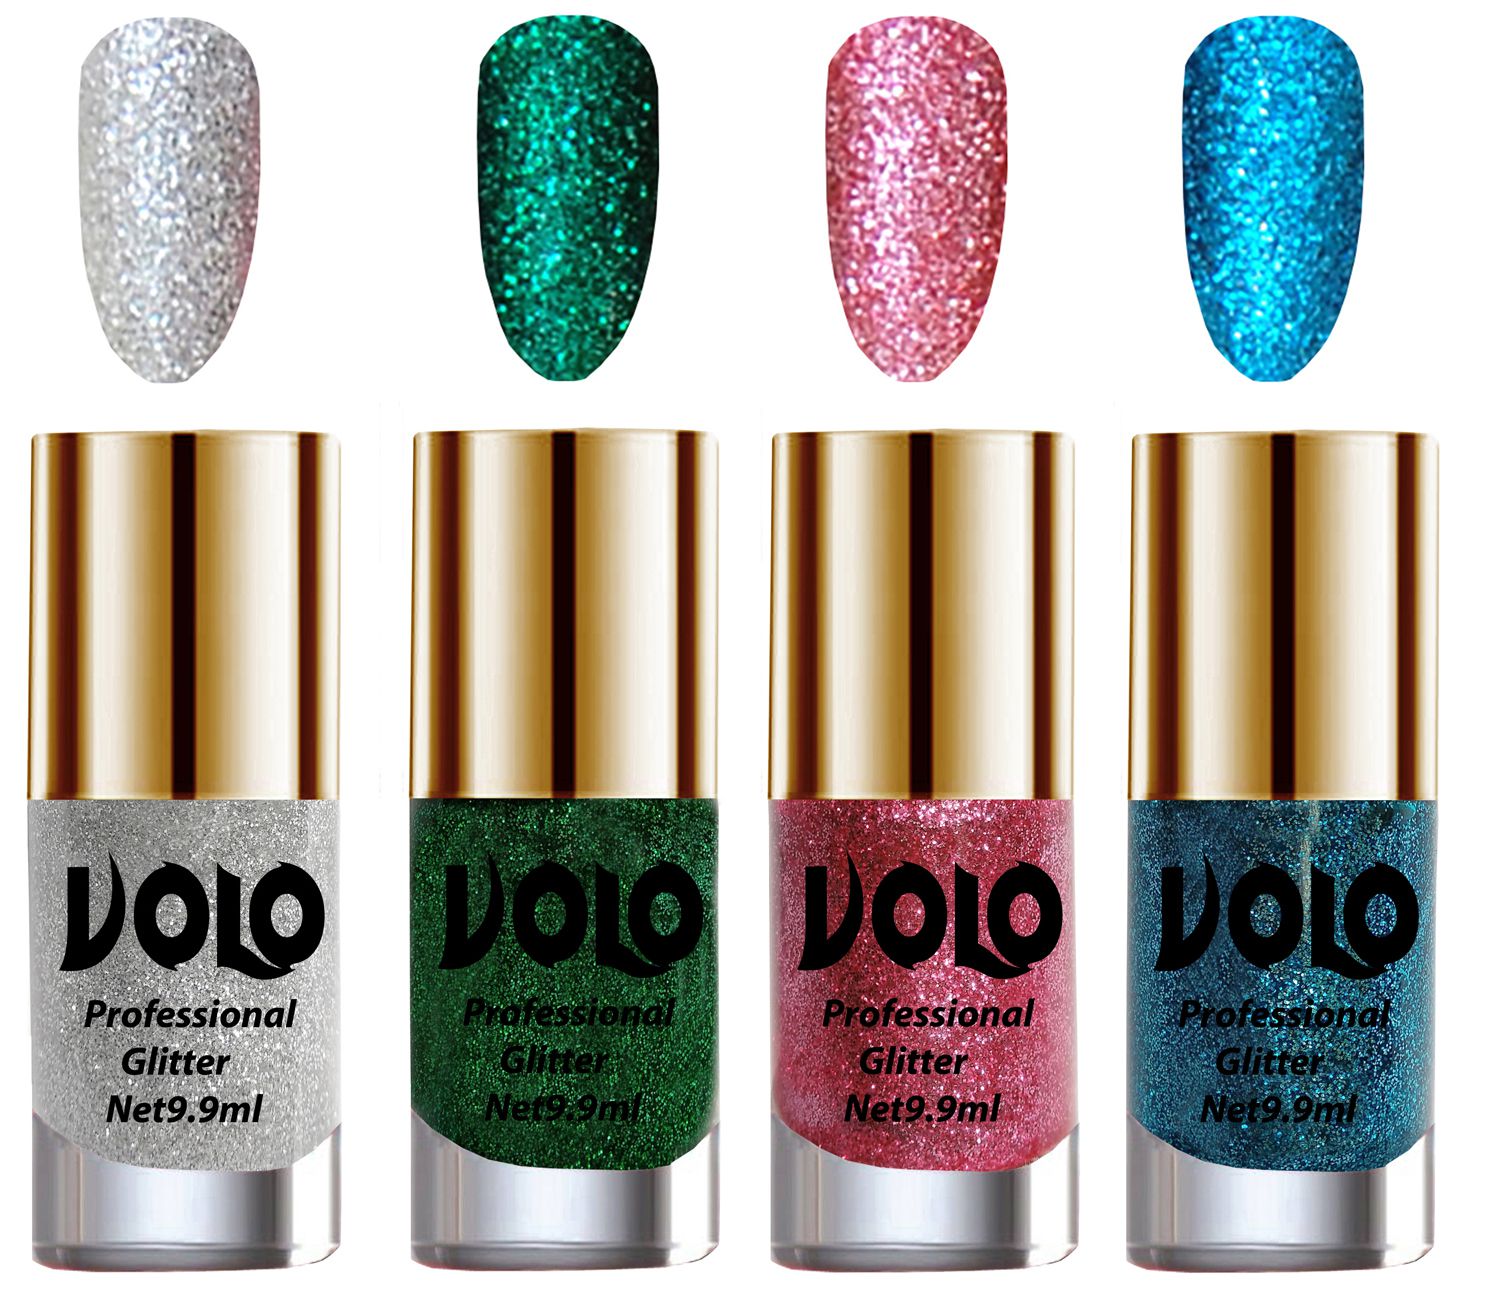     			VOLO Professionally Used Glitter Shine Nail Polish Silver,Green,Pink Blue Pack of 4 39 mL